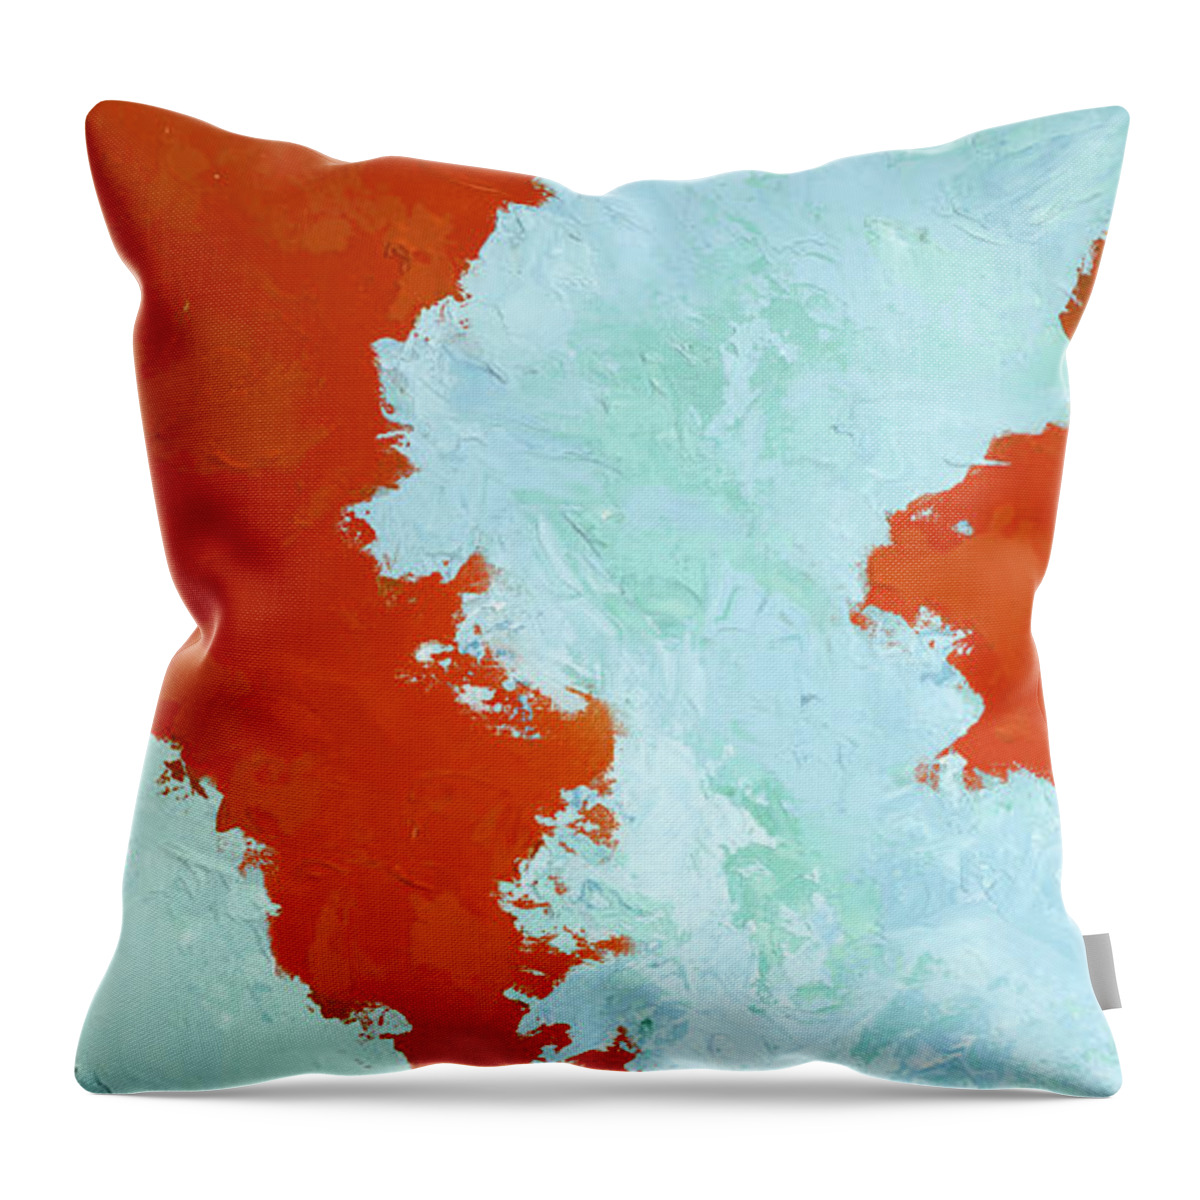 Abstract Throw Pillow featuring the painting Caribbean Cay by Tamara Nelson